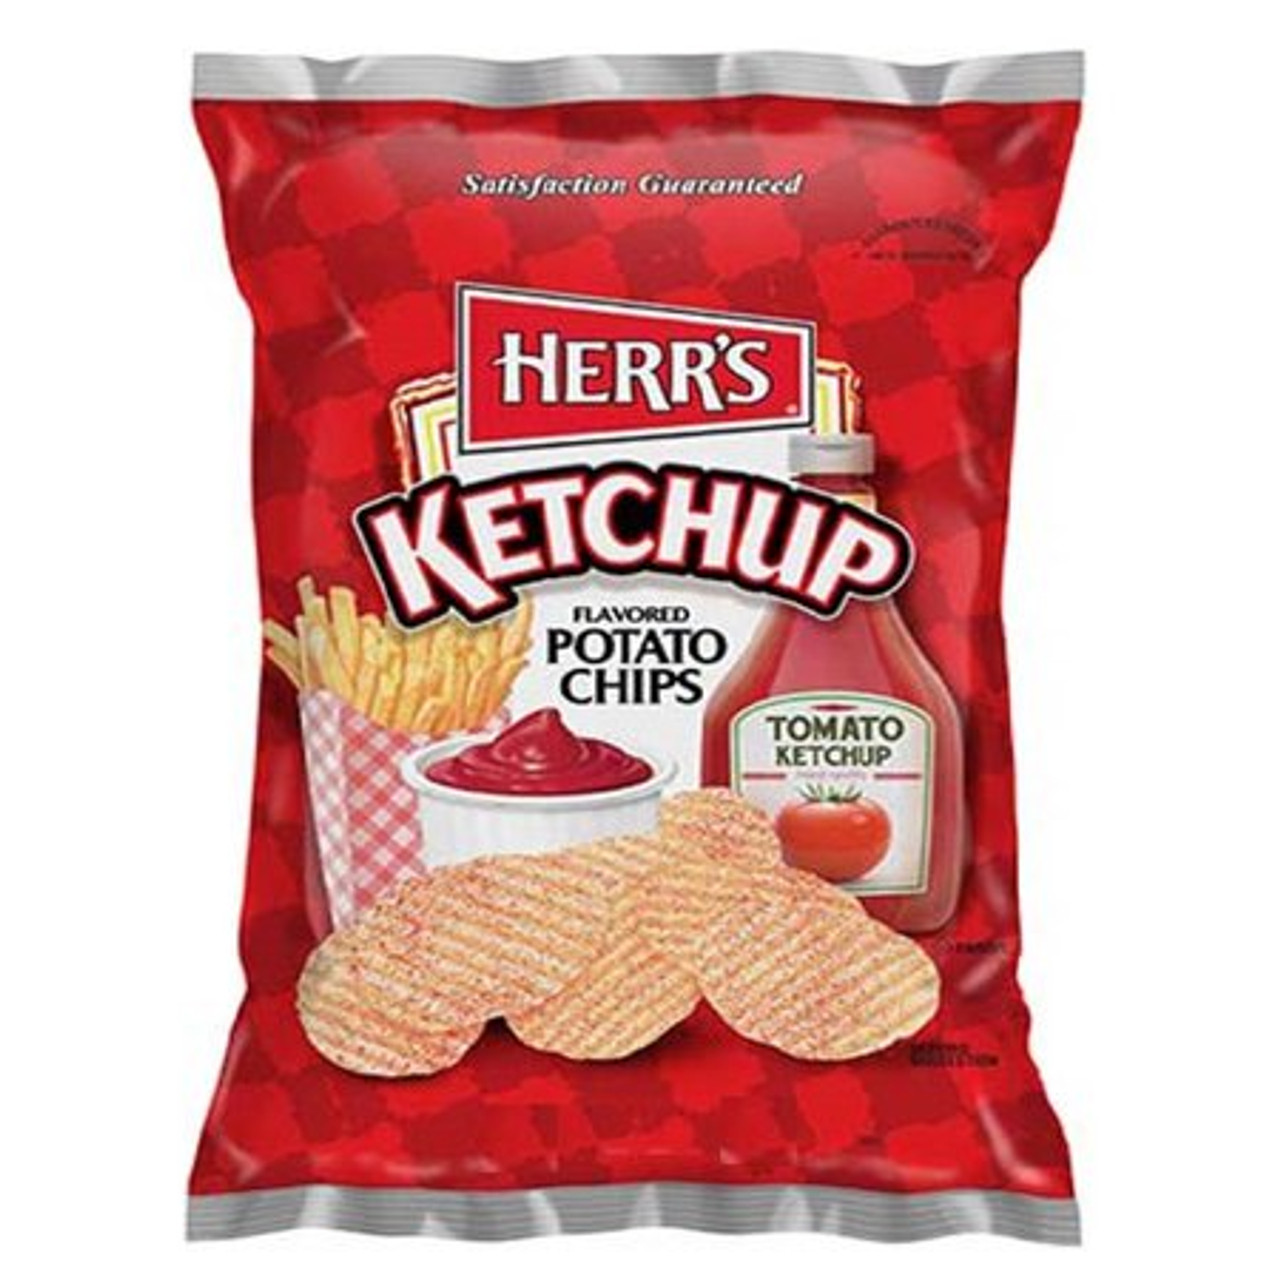 HERR'S Ketchup flavoured potato chips 99.2g each bag | USA Candy Factory